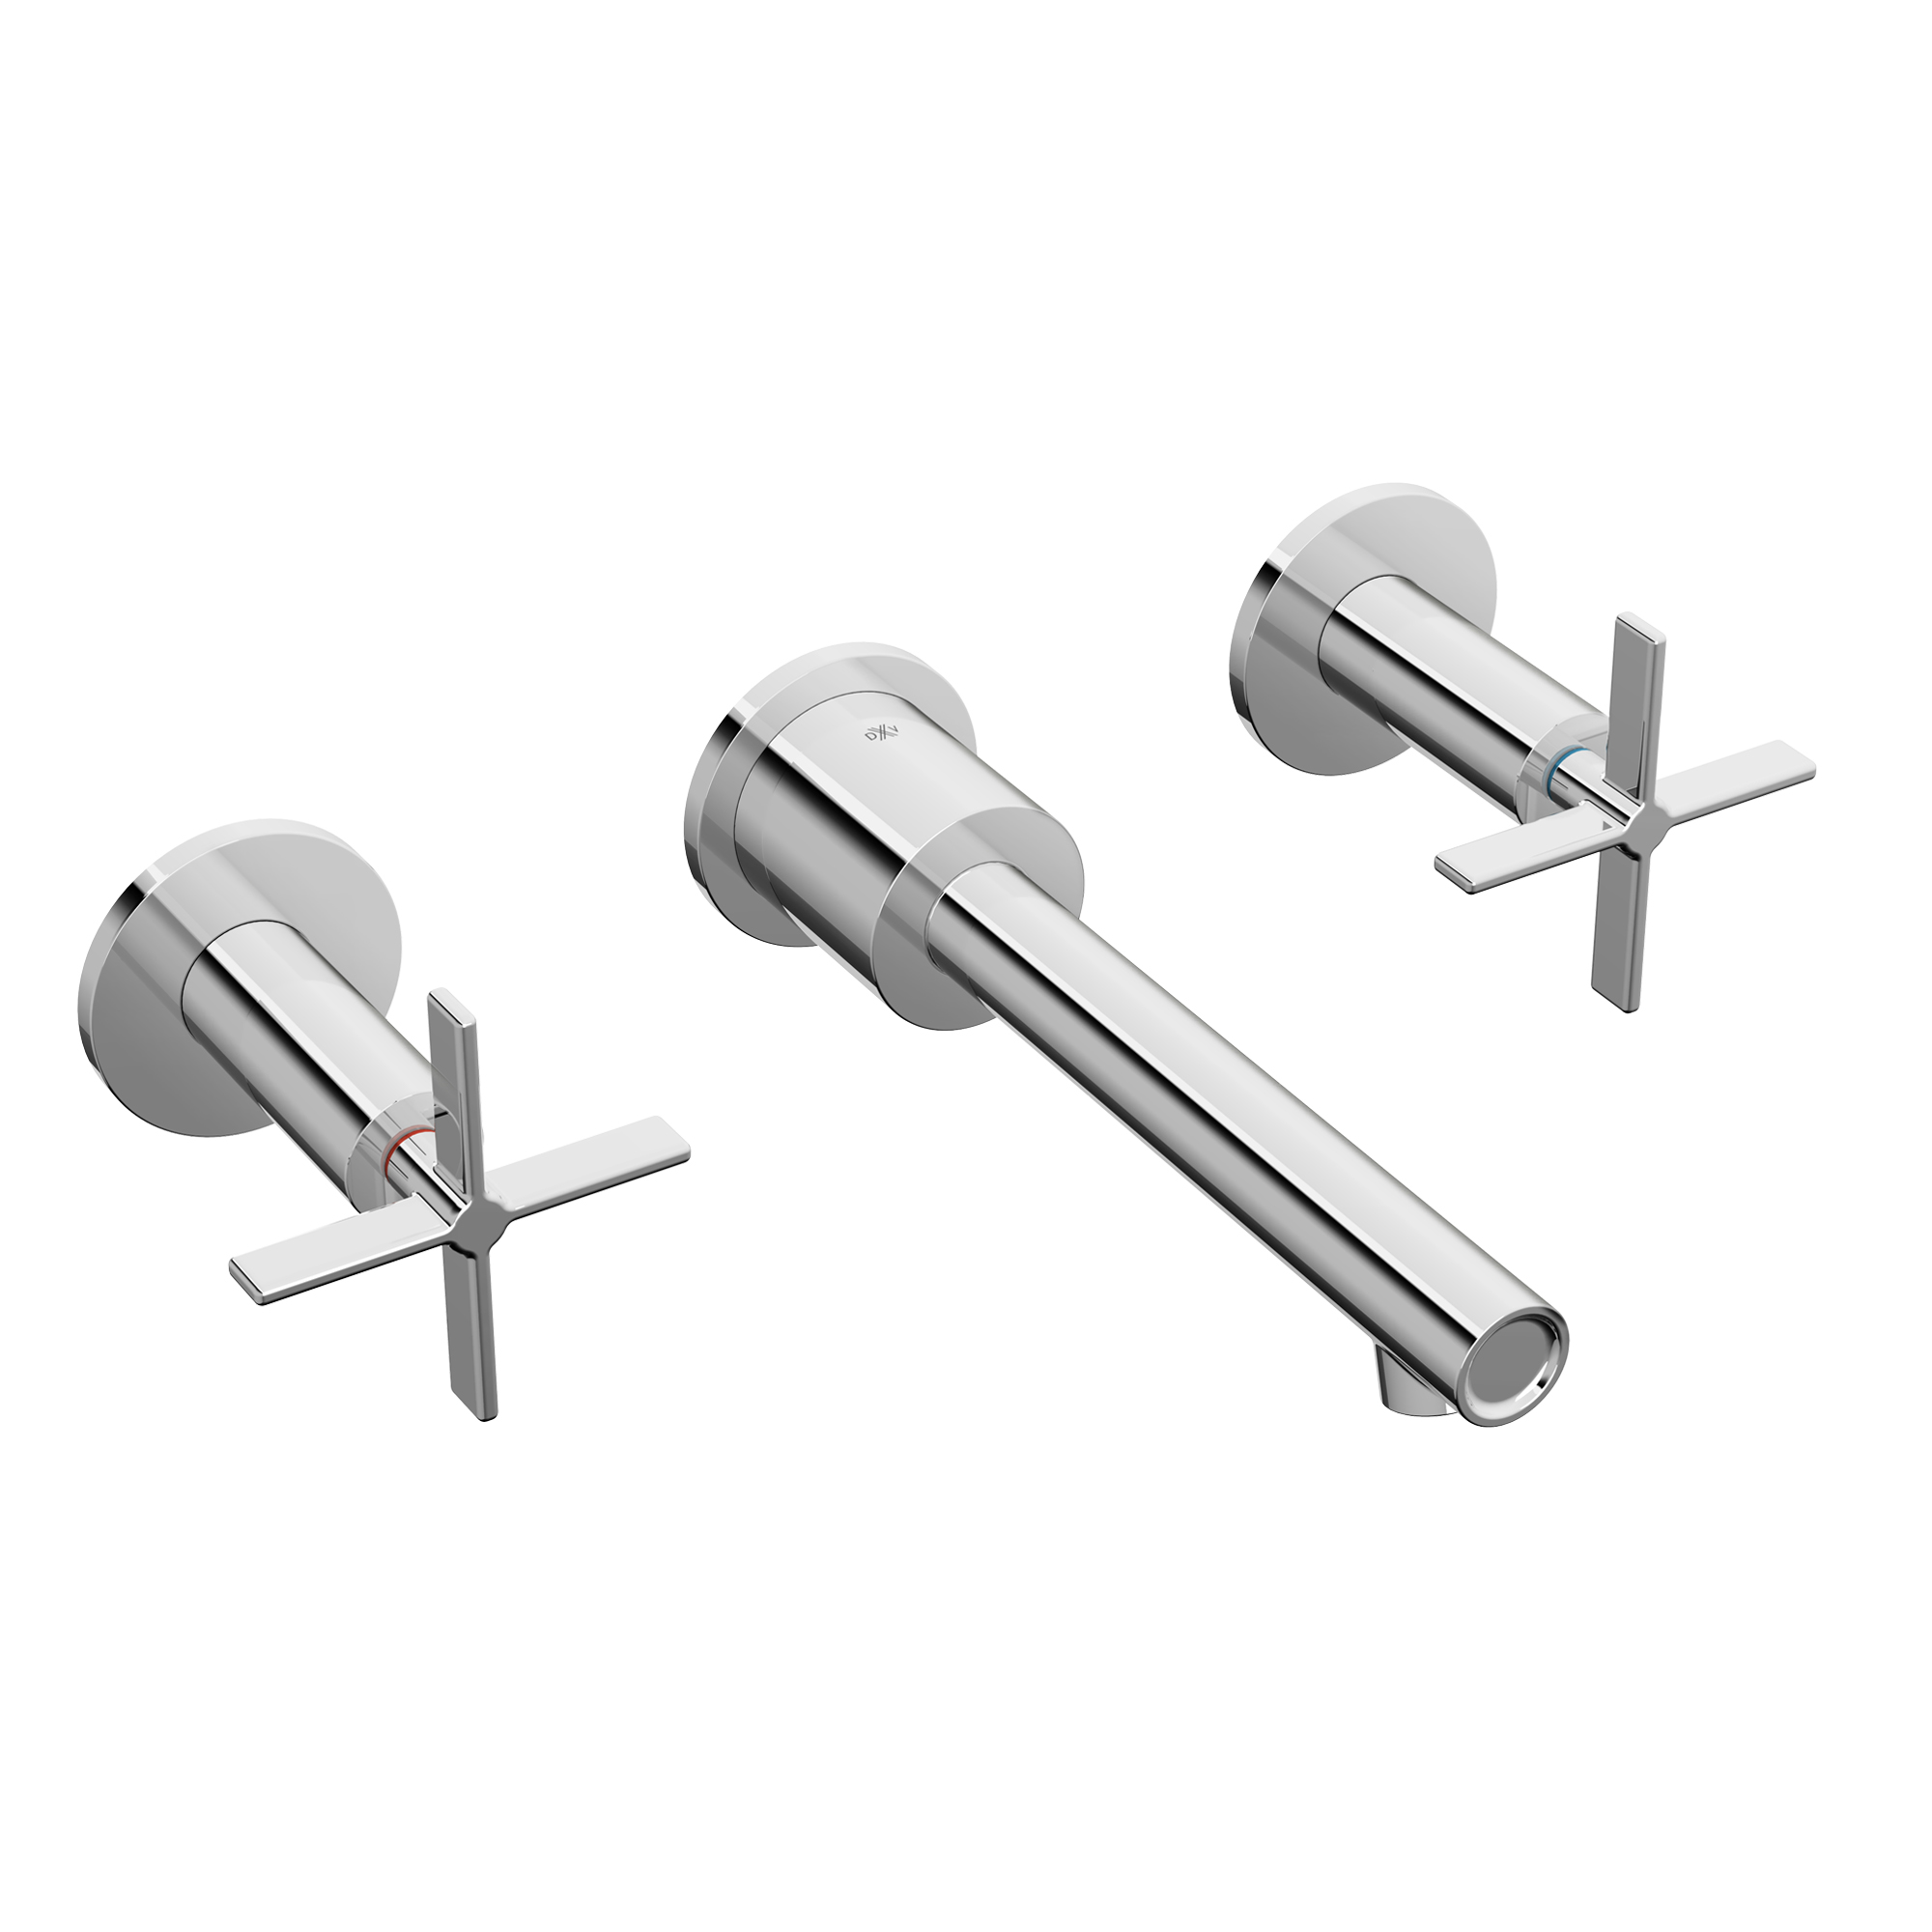 Percy 2-Handle Wall Mounted Bathroom Faucet with Indicator Markings and Cross Handles